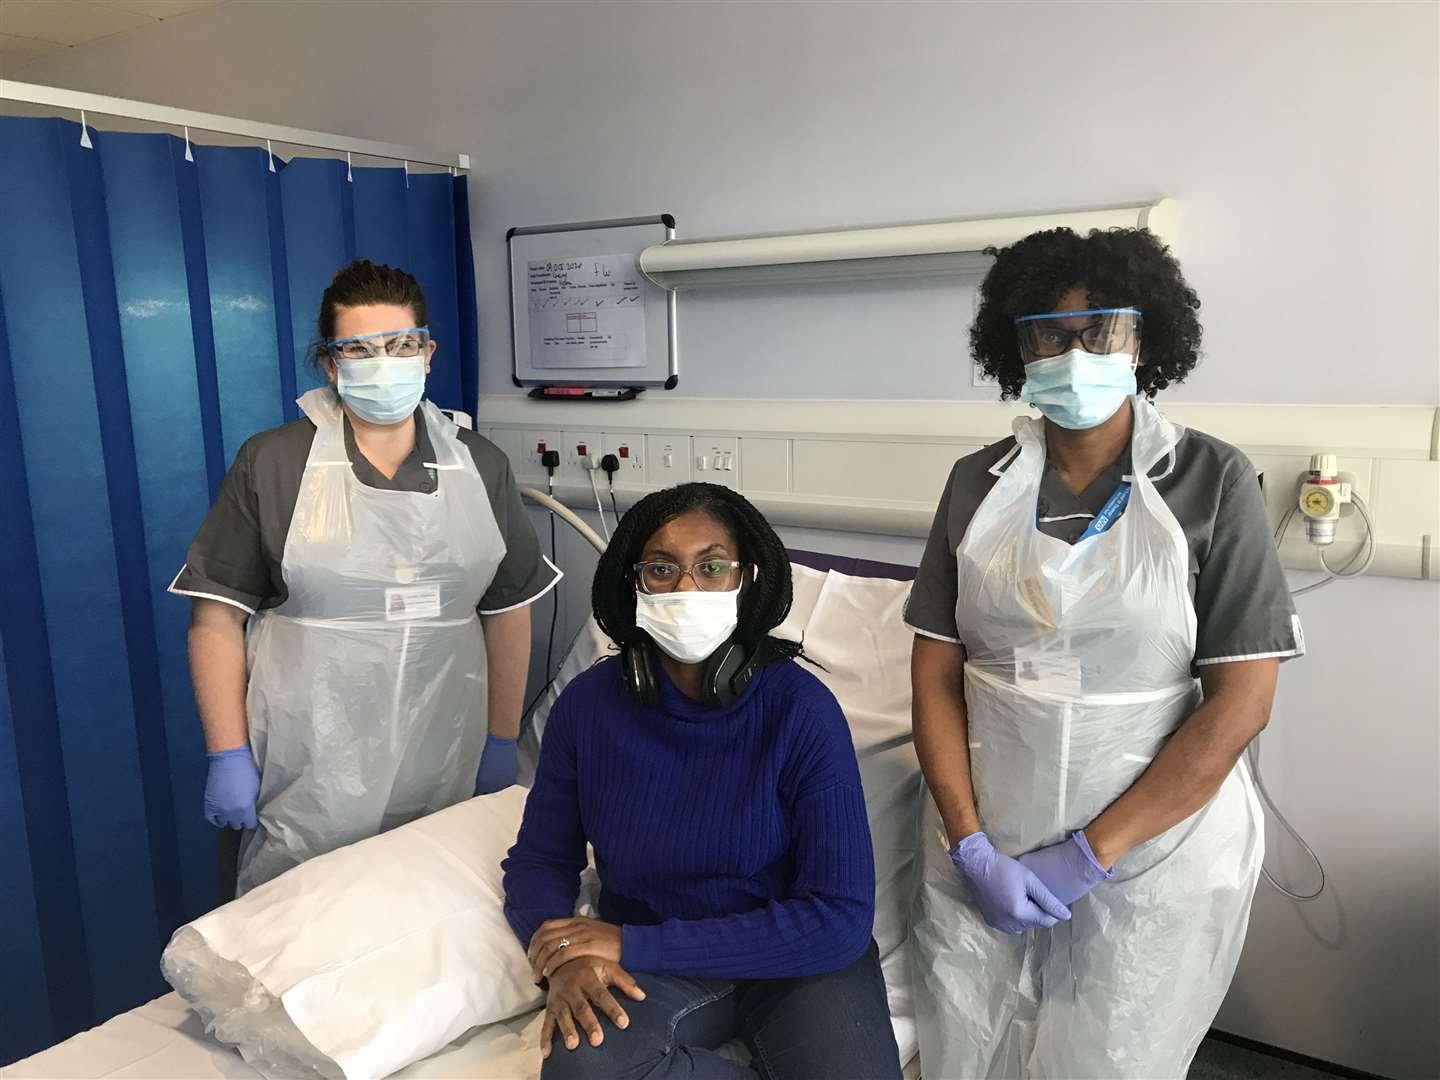 Minister for Equalities Kemi Badenoch receiving her first vaccination as part of the Novavax Phase 3 trial, which she is taking part in at Guy’s and St Thomas’ NHS Foundation Trust, London (Handout/PA)